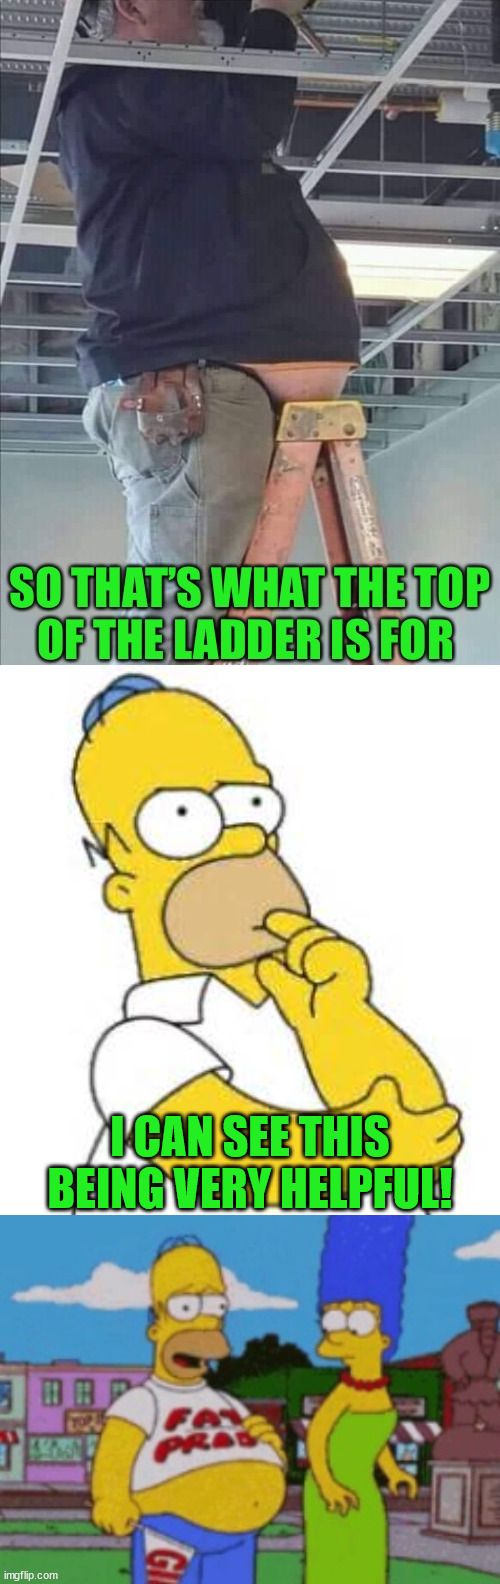 Ladder Tip of the Day |  I CAN SEE THIS BEING VERY HELPFUL! | image tagged in homer simpson hmmmm,memes,fat people,first world problems,what if i told you,what a terrible day to have eyes | made w/ Imgflip meme maker